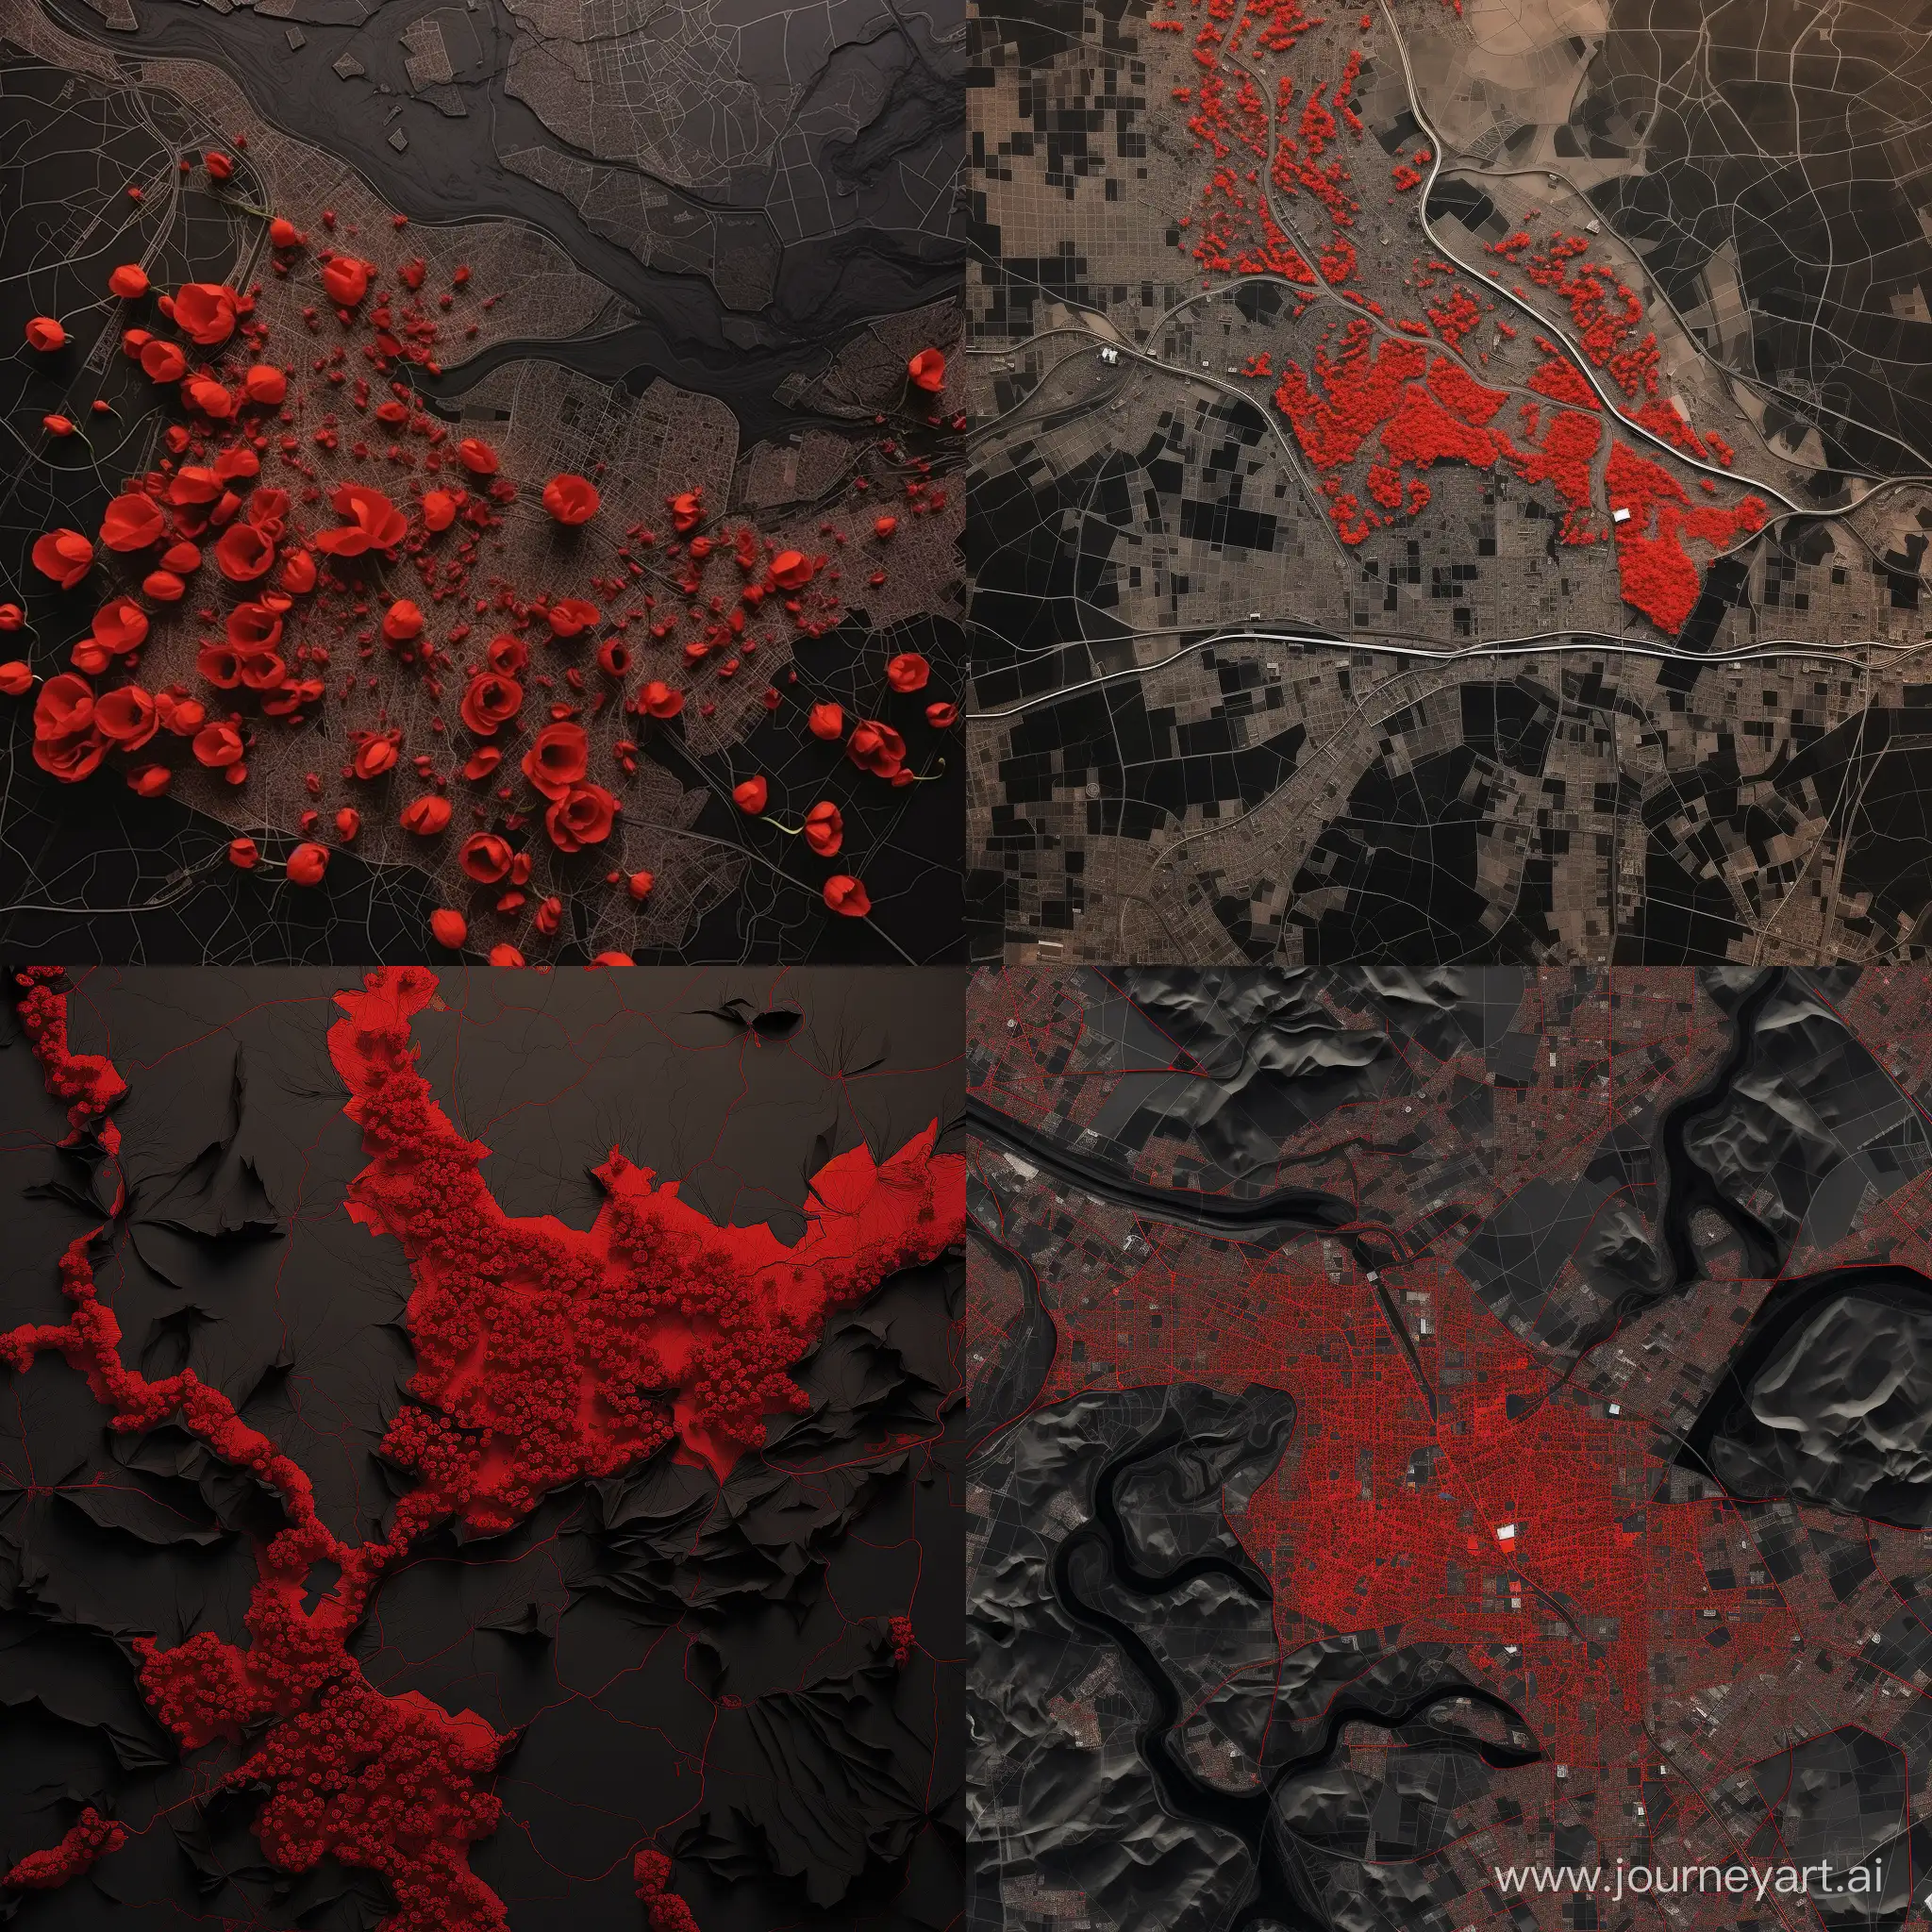 Aerial-Map-of-Iran-and-Kerman-Province-Striking-Black-Landscape-with-Vibrant-Red-Tulips